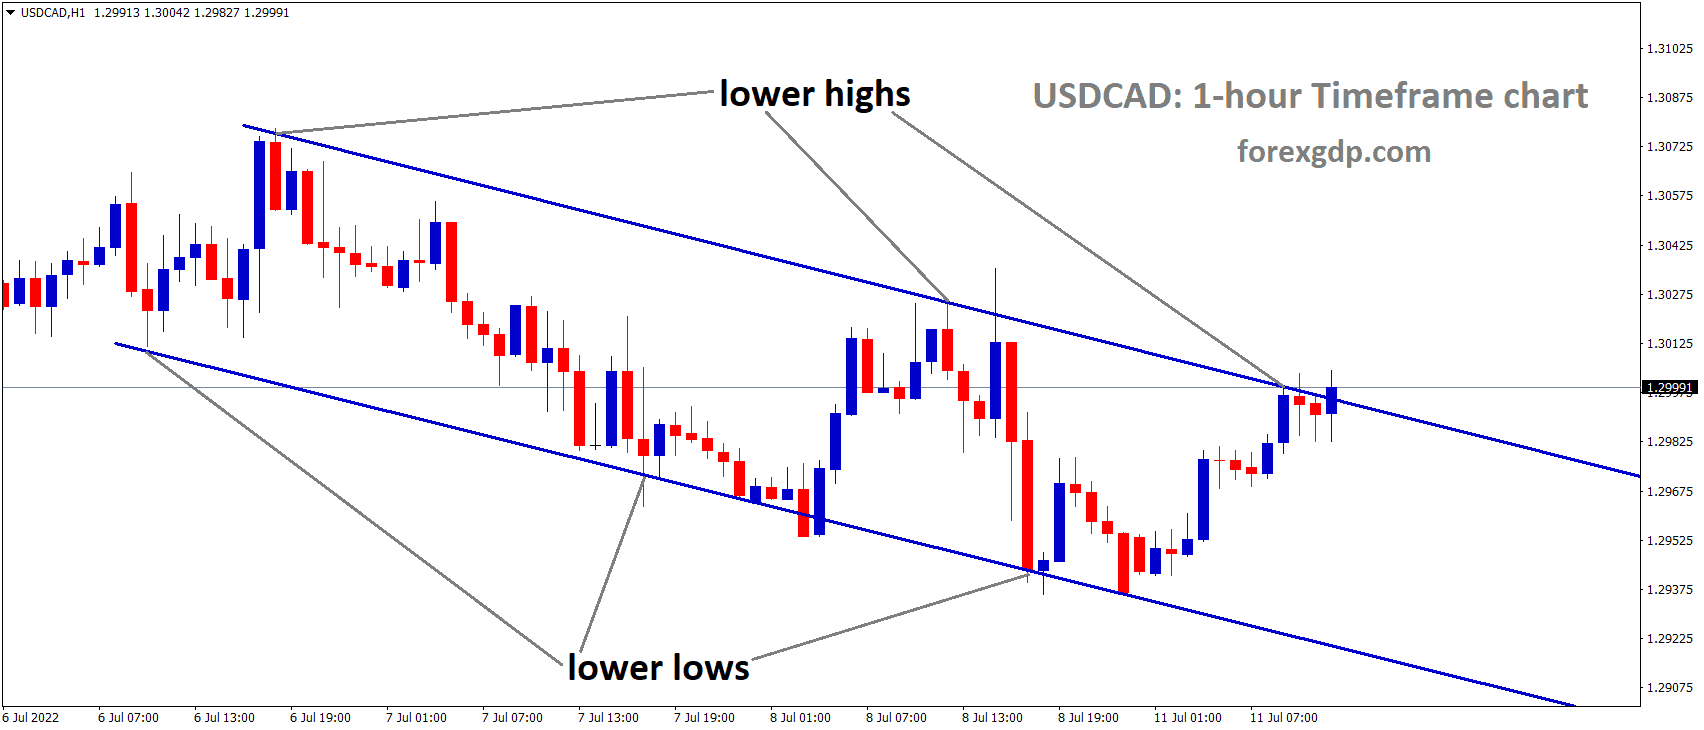 USDCAD is moving in the Descending channel and the Market has reached the Lower high area of the channel 2